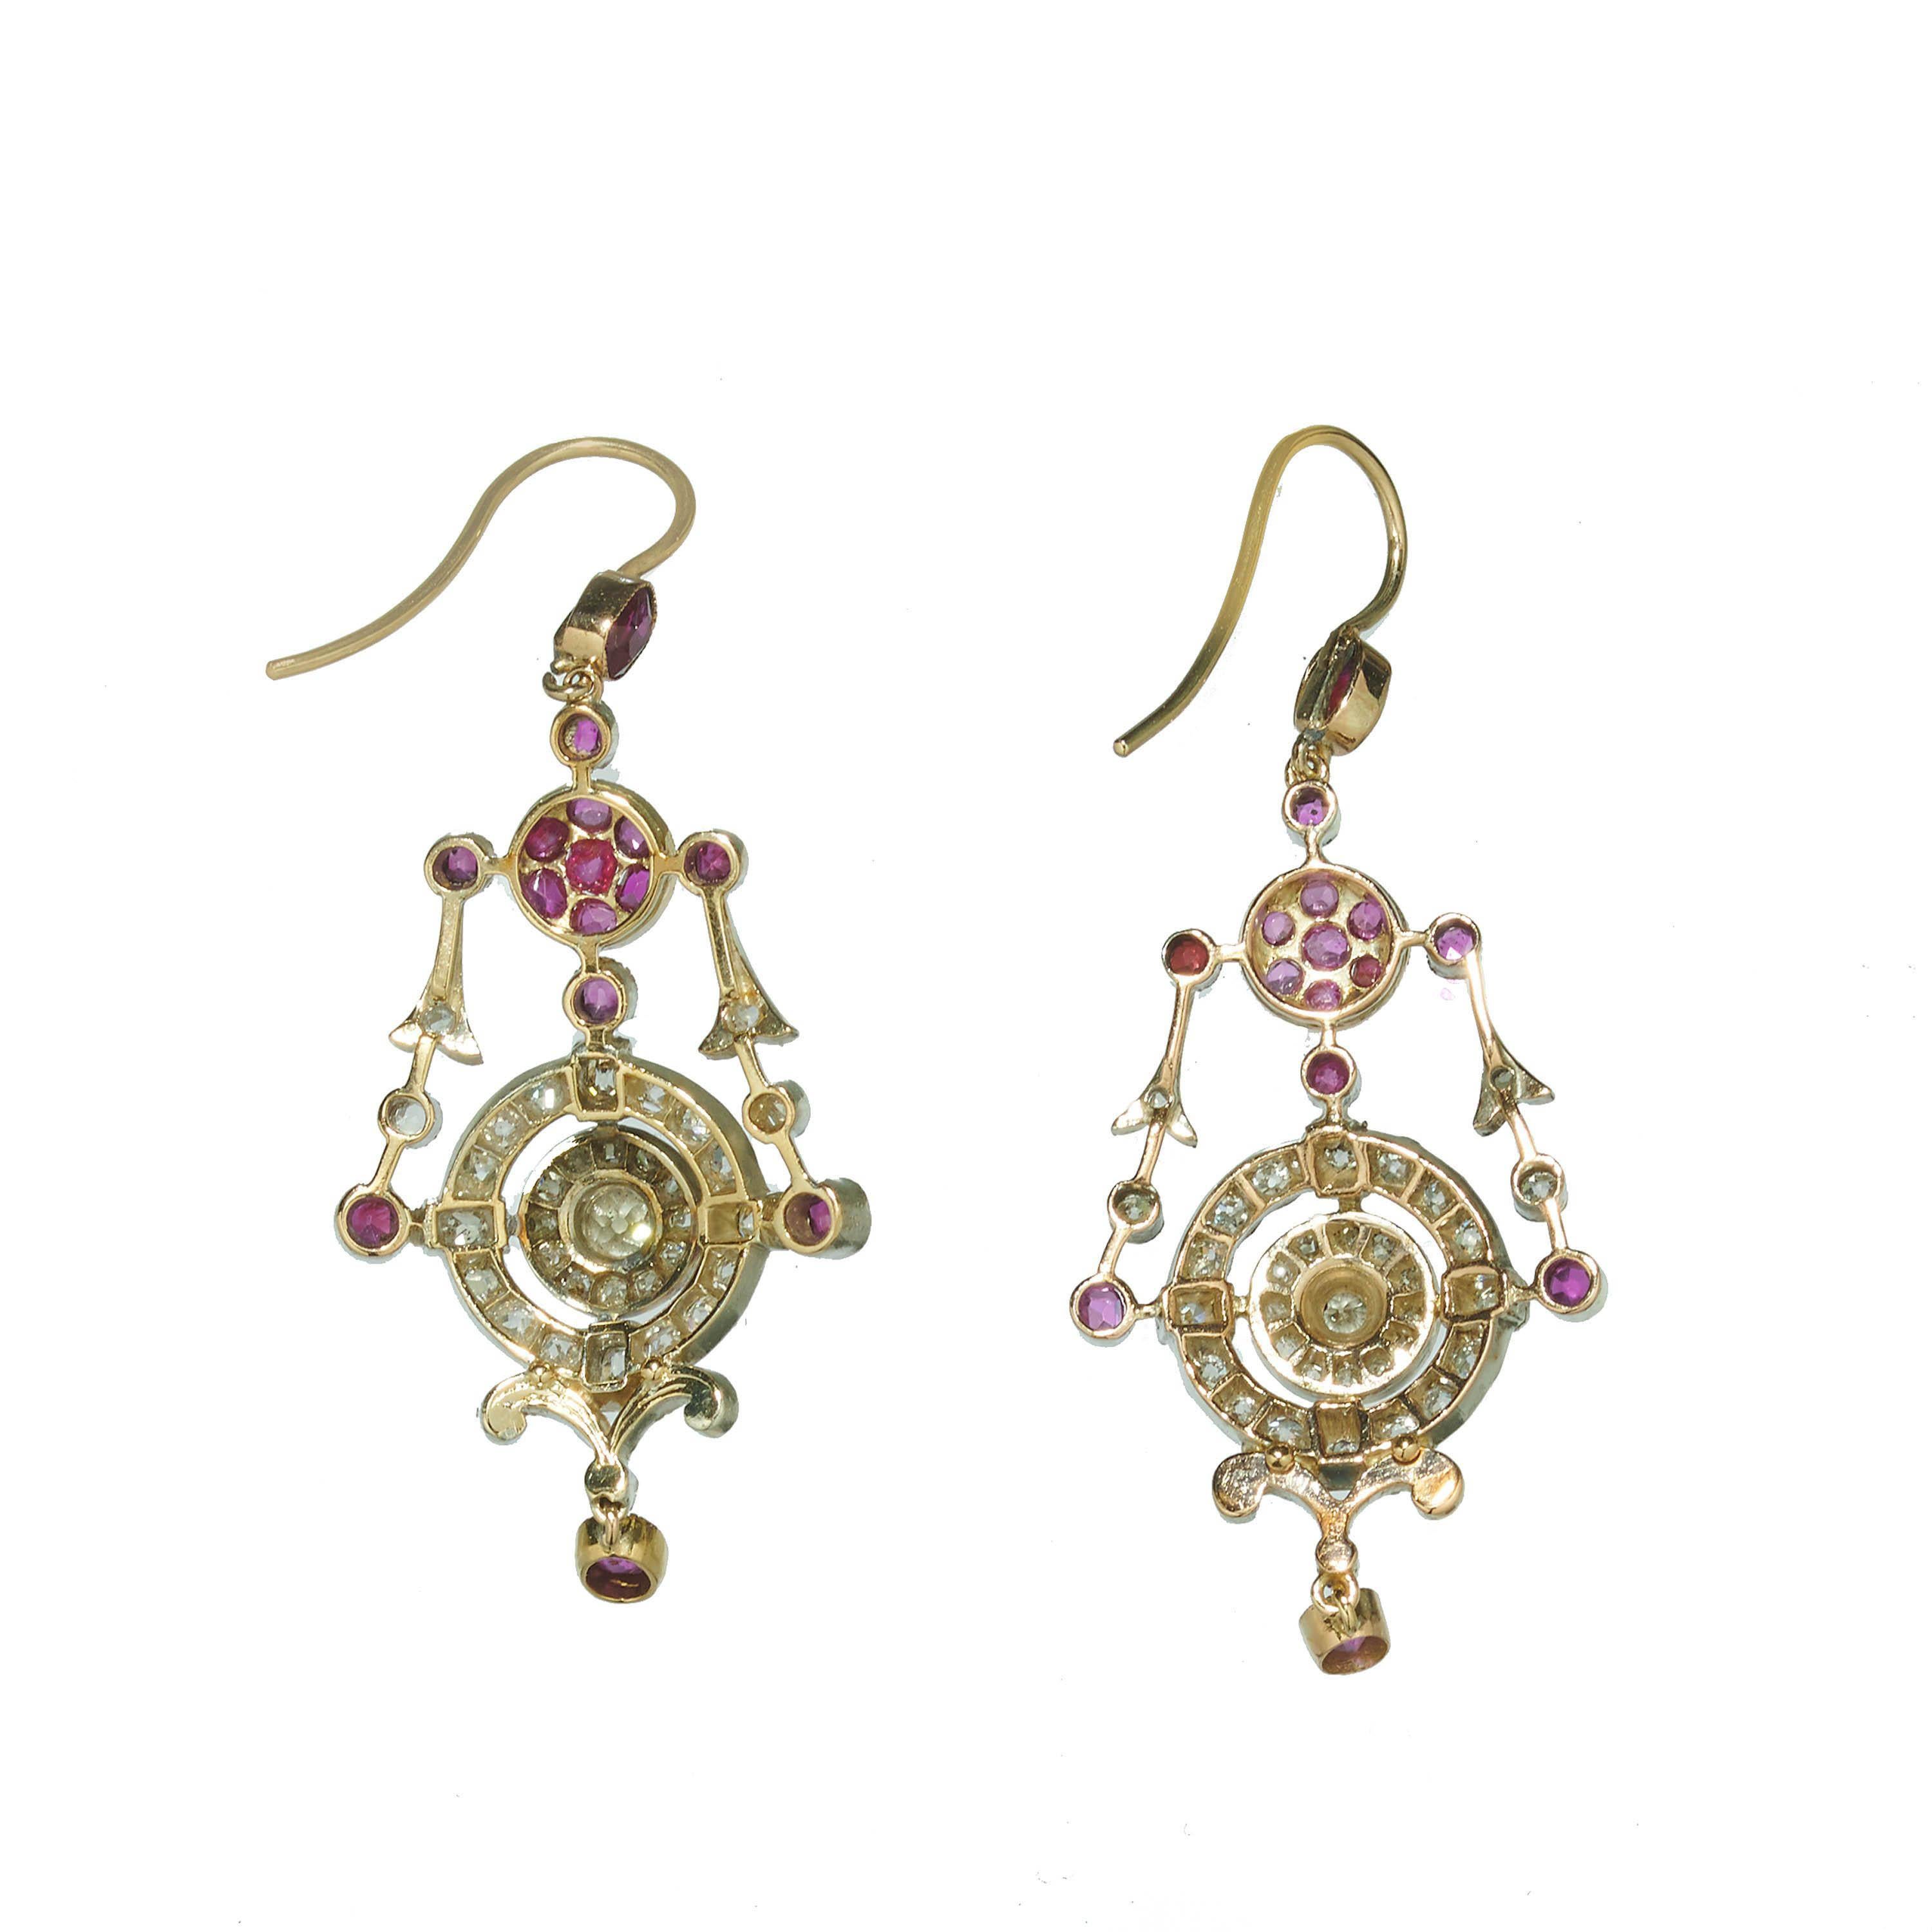 Antique Cushion Cut Antique Ruby, Diamond, Silver And Gold Drop Earrings, Circa 1880 For Sale